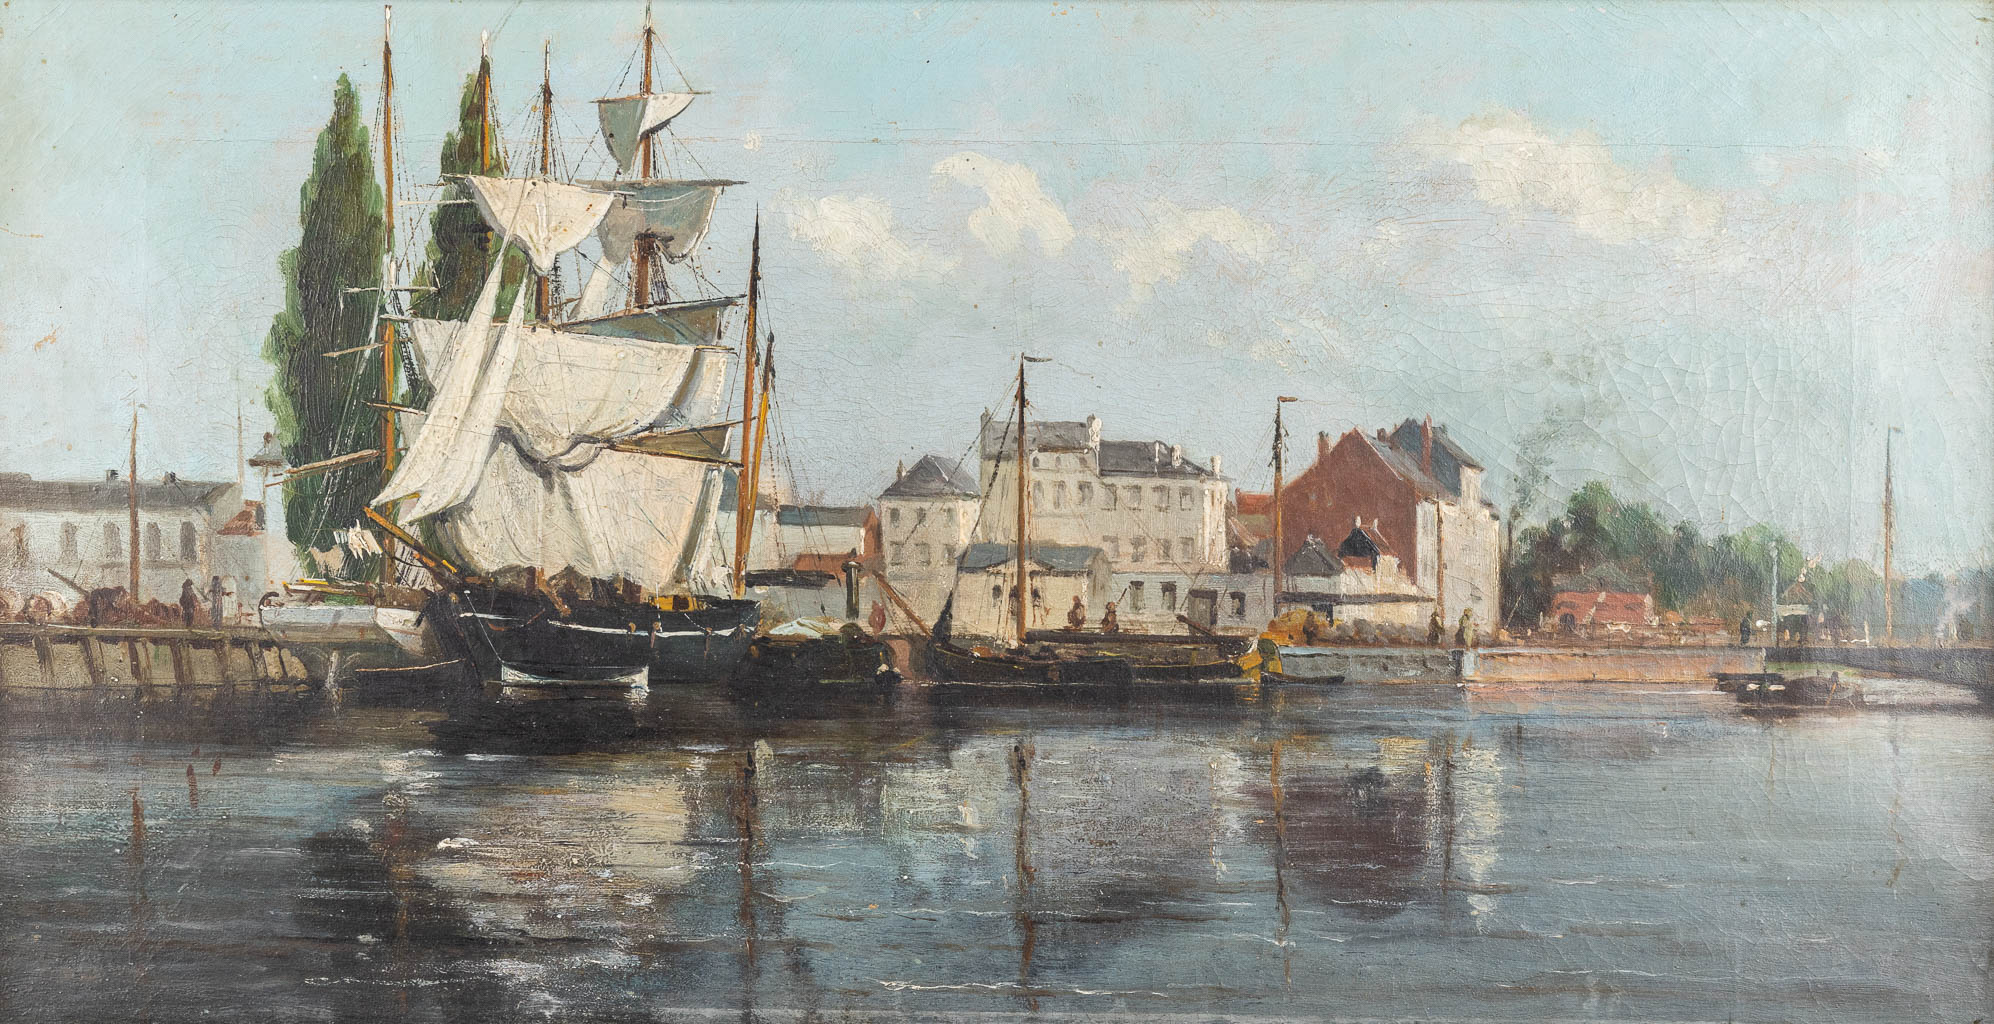 Léon VALCKENAERE (1853-1926)(attr) 'View on the harbor' a painting, oil on canvas. (W: 55 x H: 30 cm)